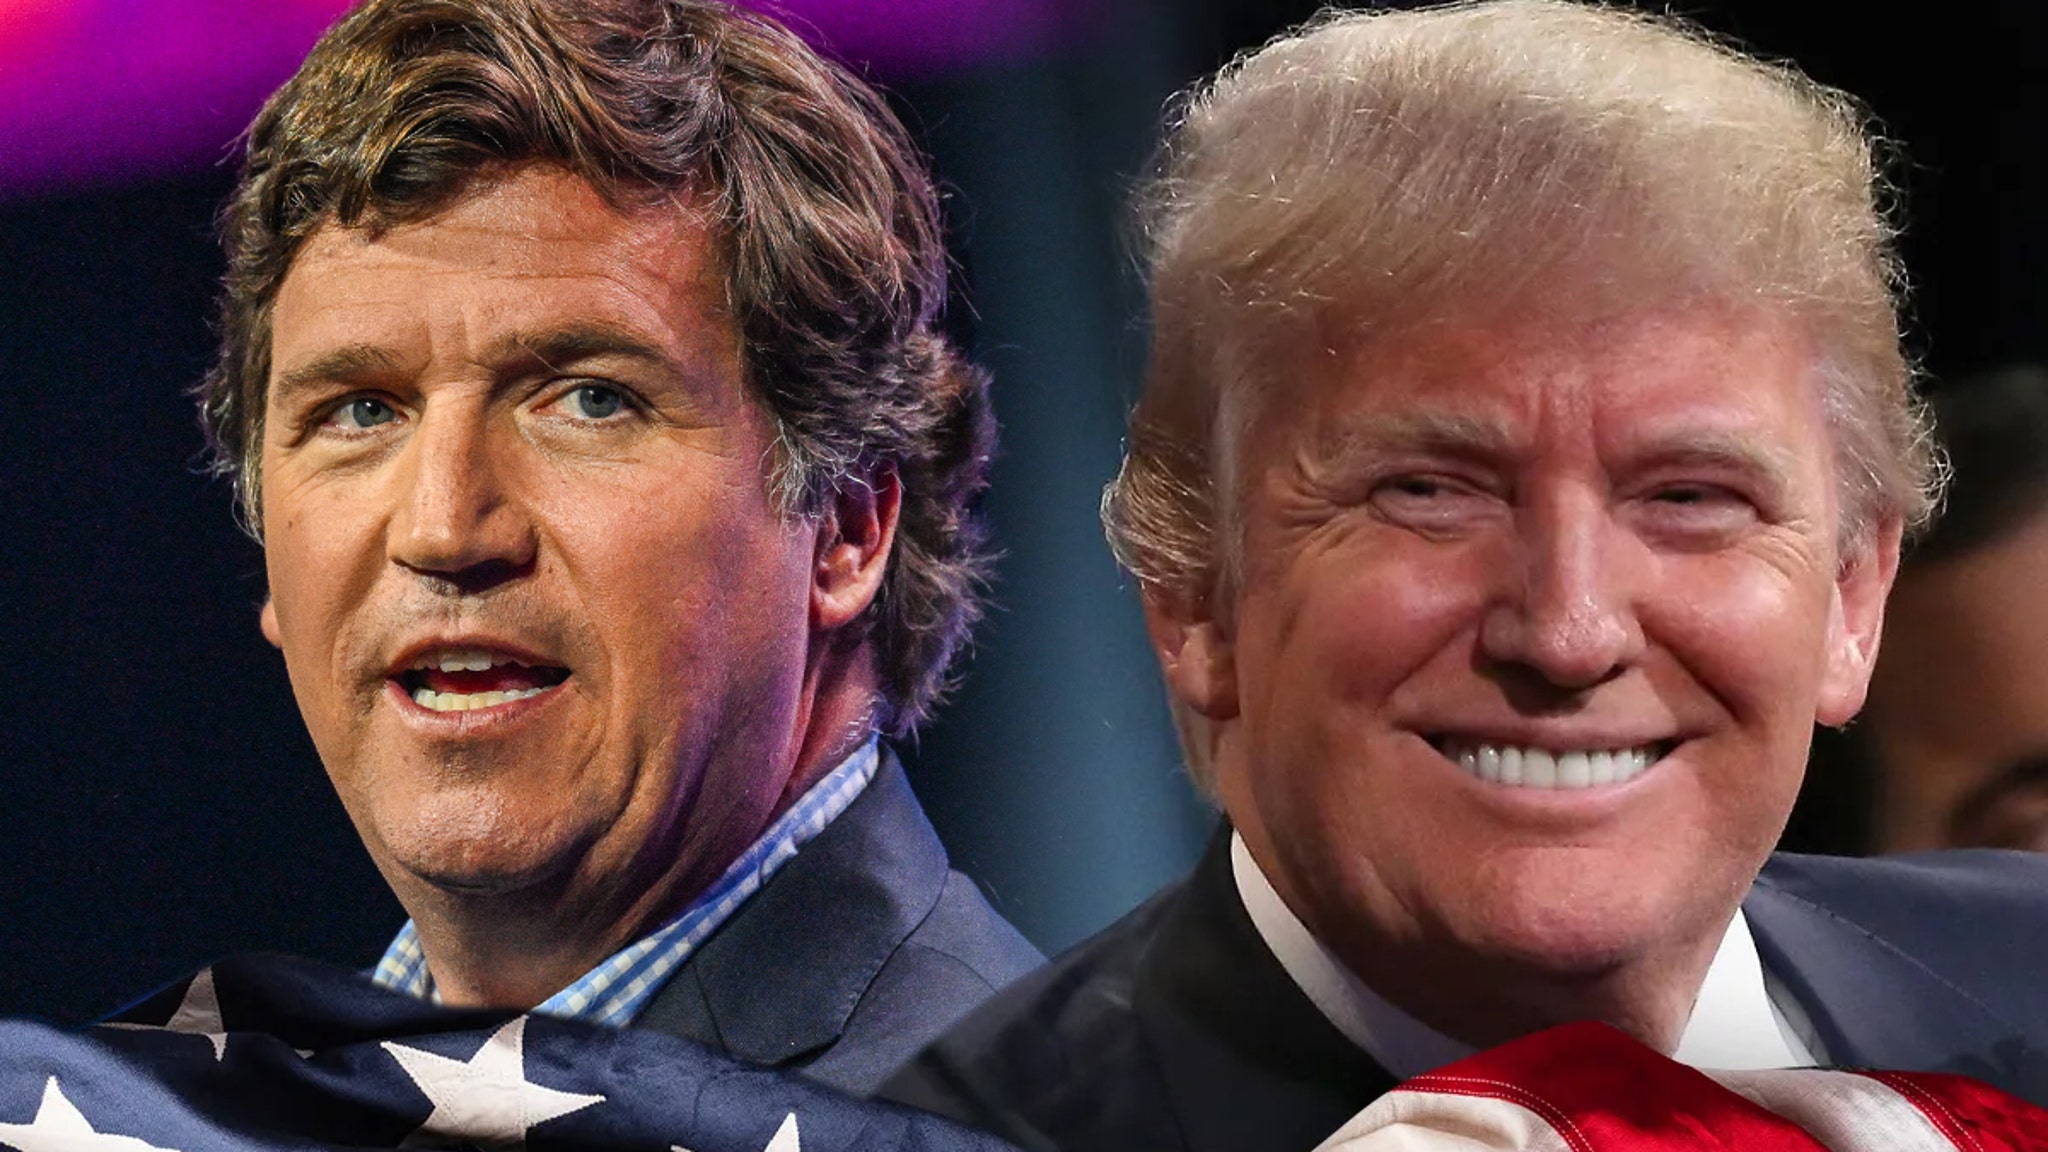 Tucker Carlson Could Be Persuaded to Run as Trump’s VP, Sources Say